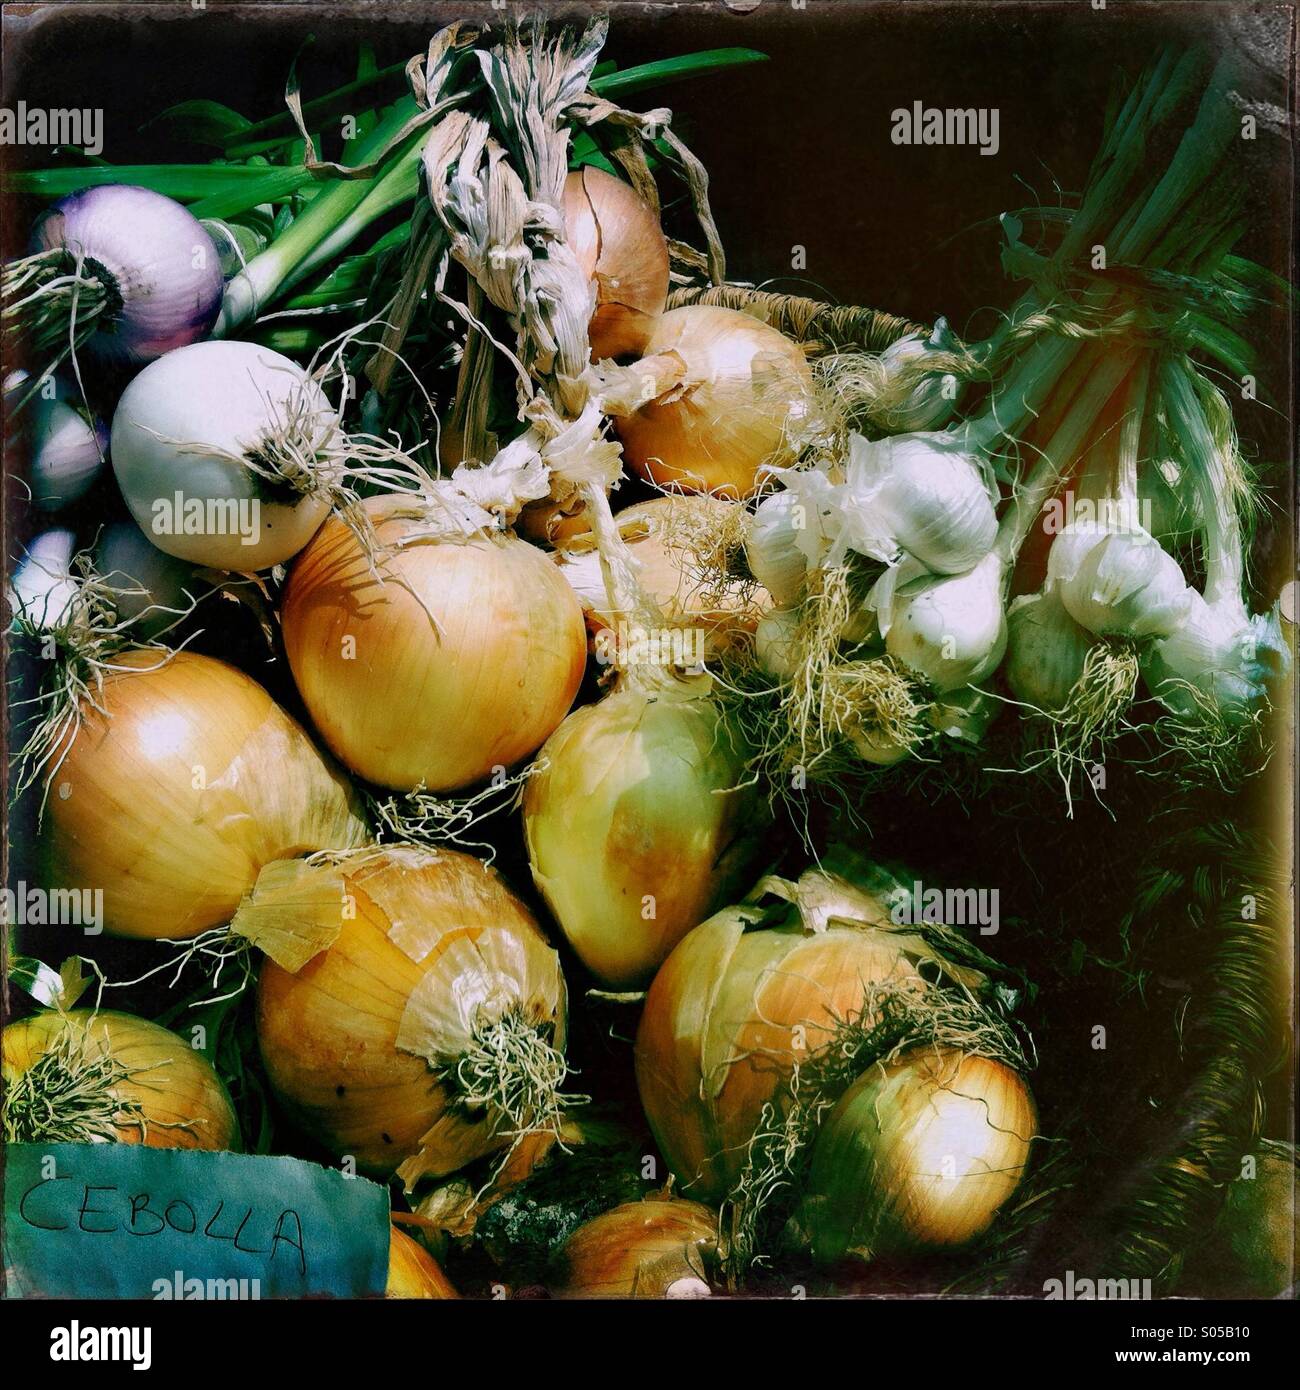 Onions on a rural Spanish farmers market Stock Photo